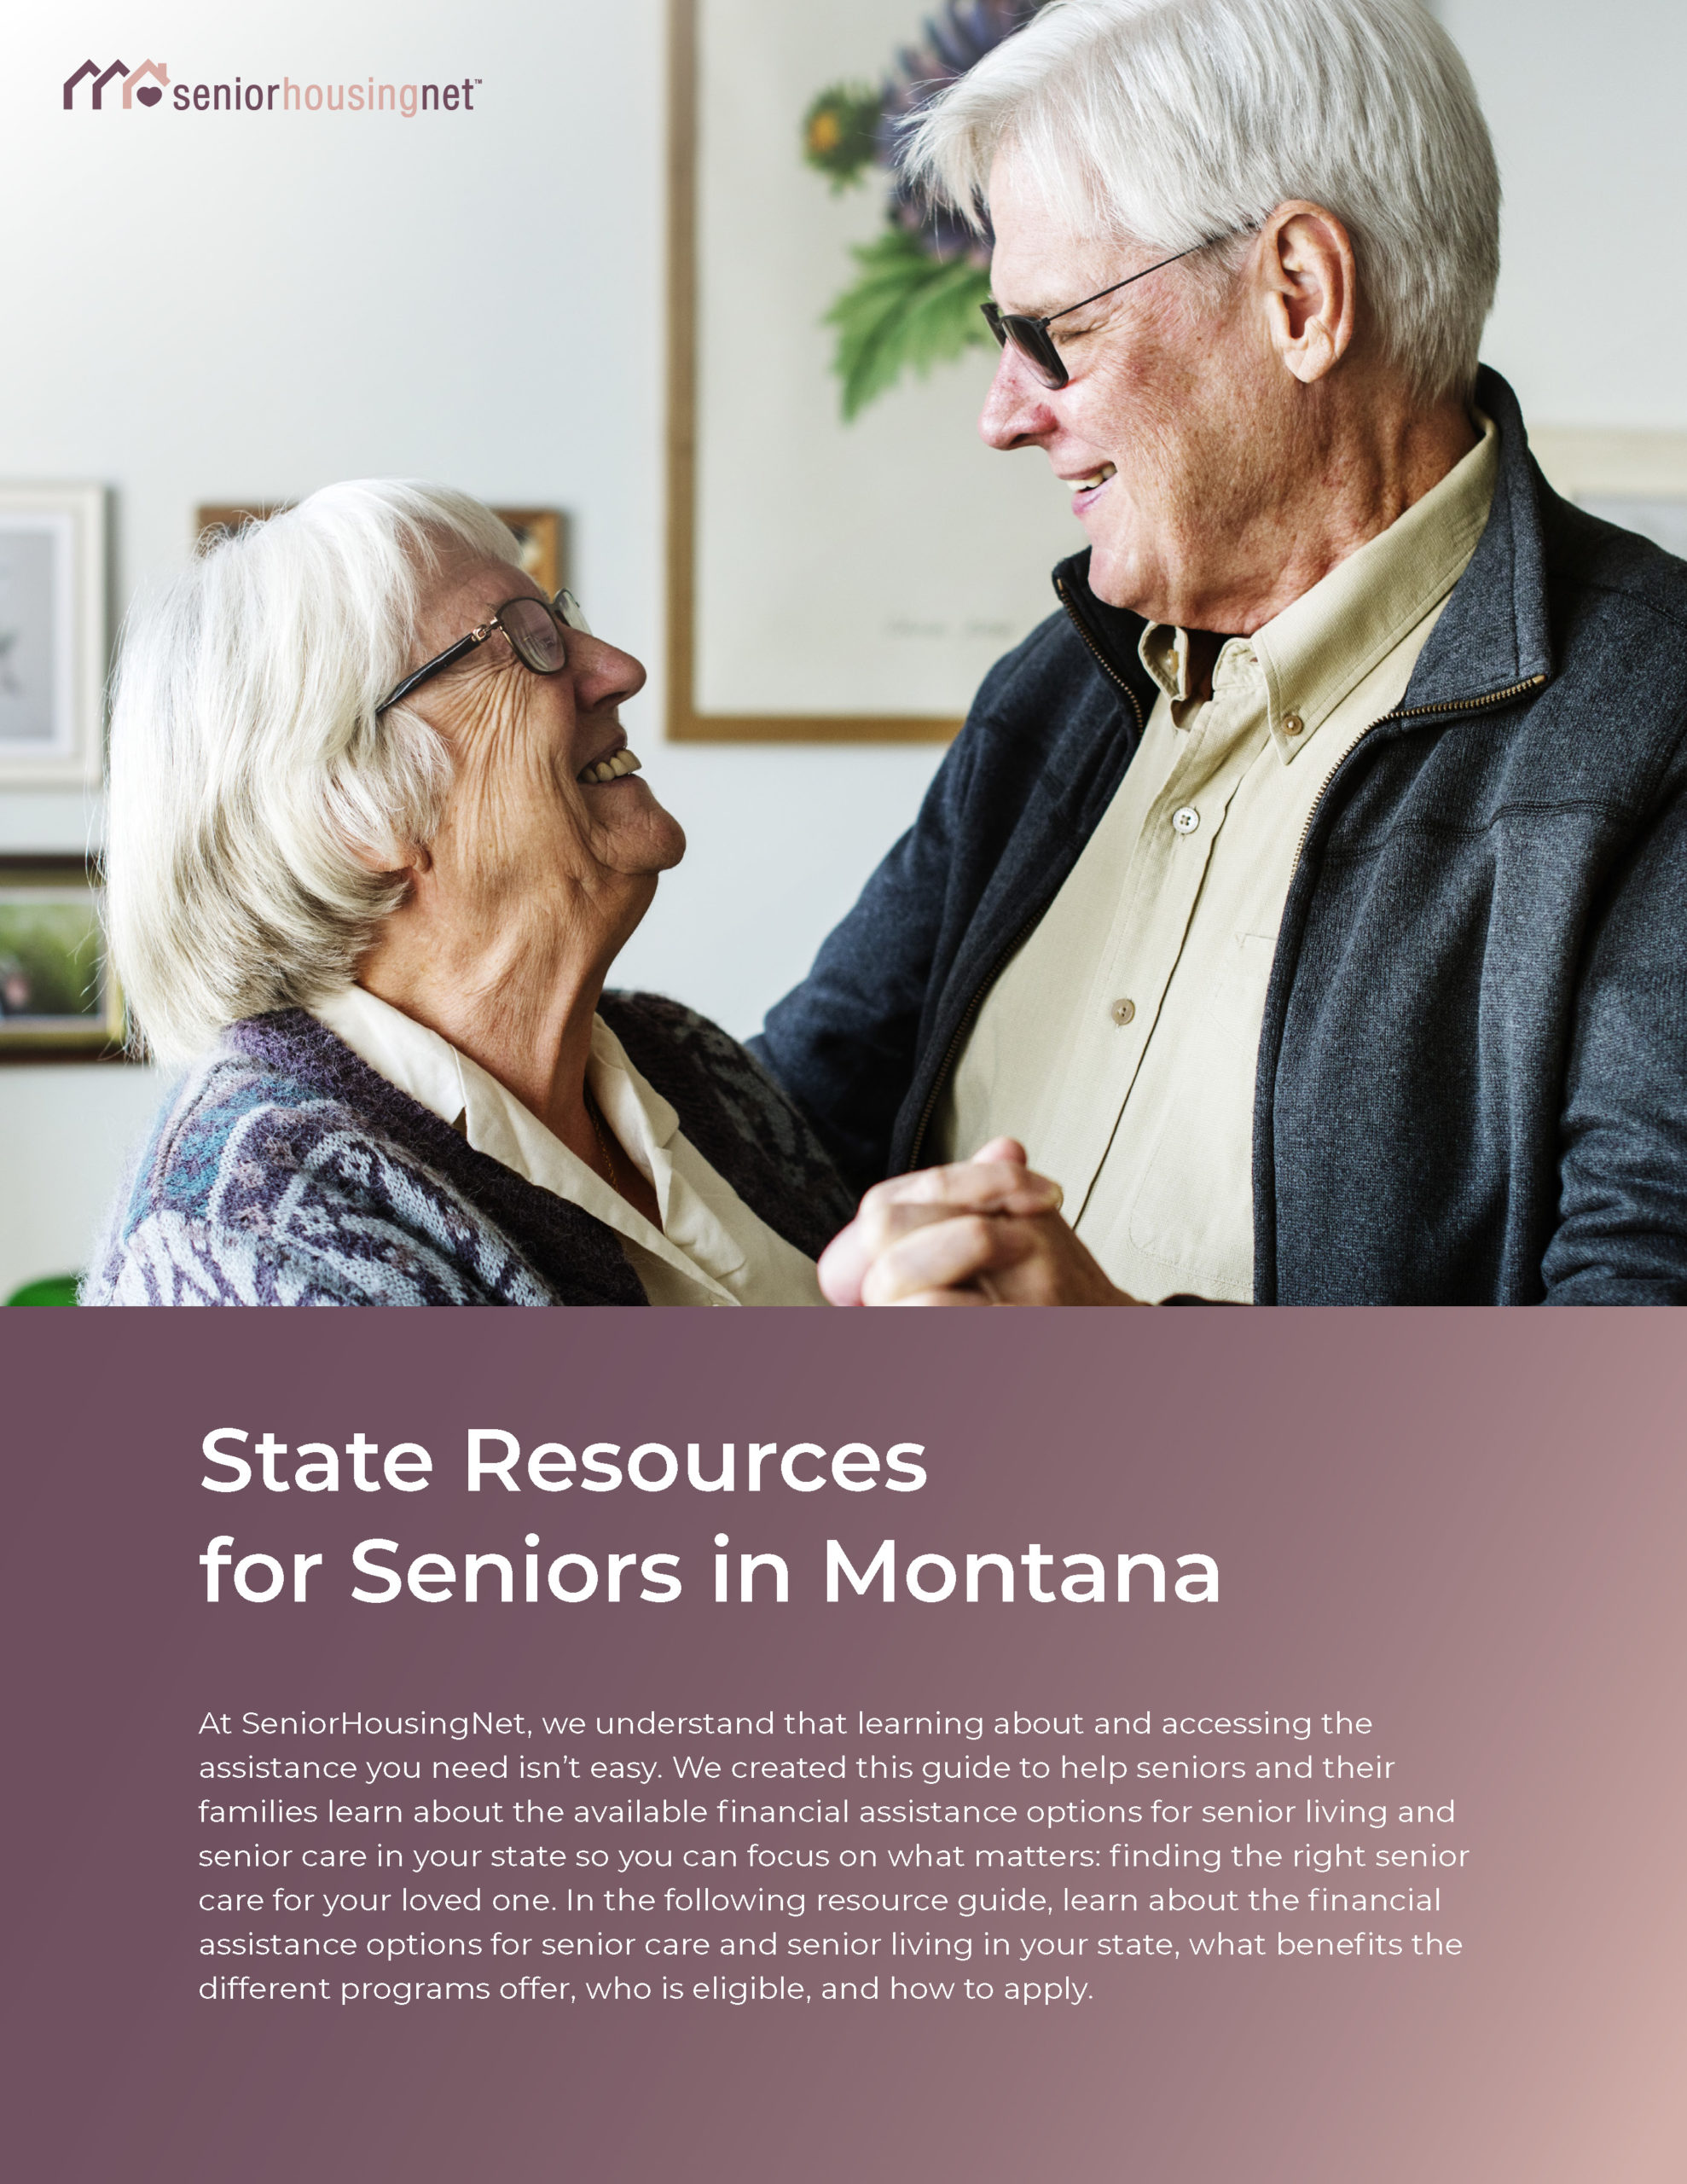 State Resources for Seniors in Montana